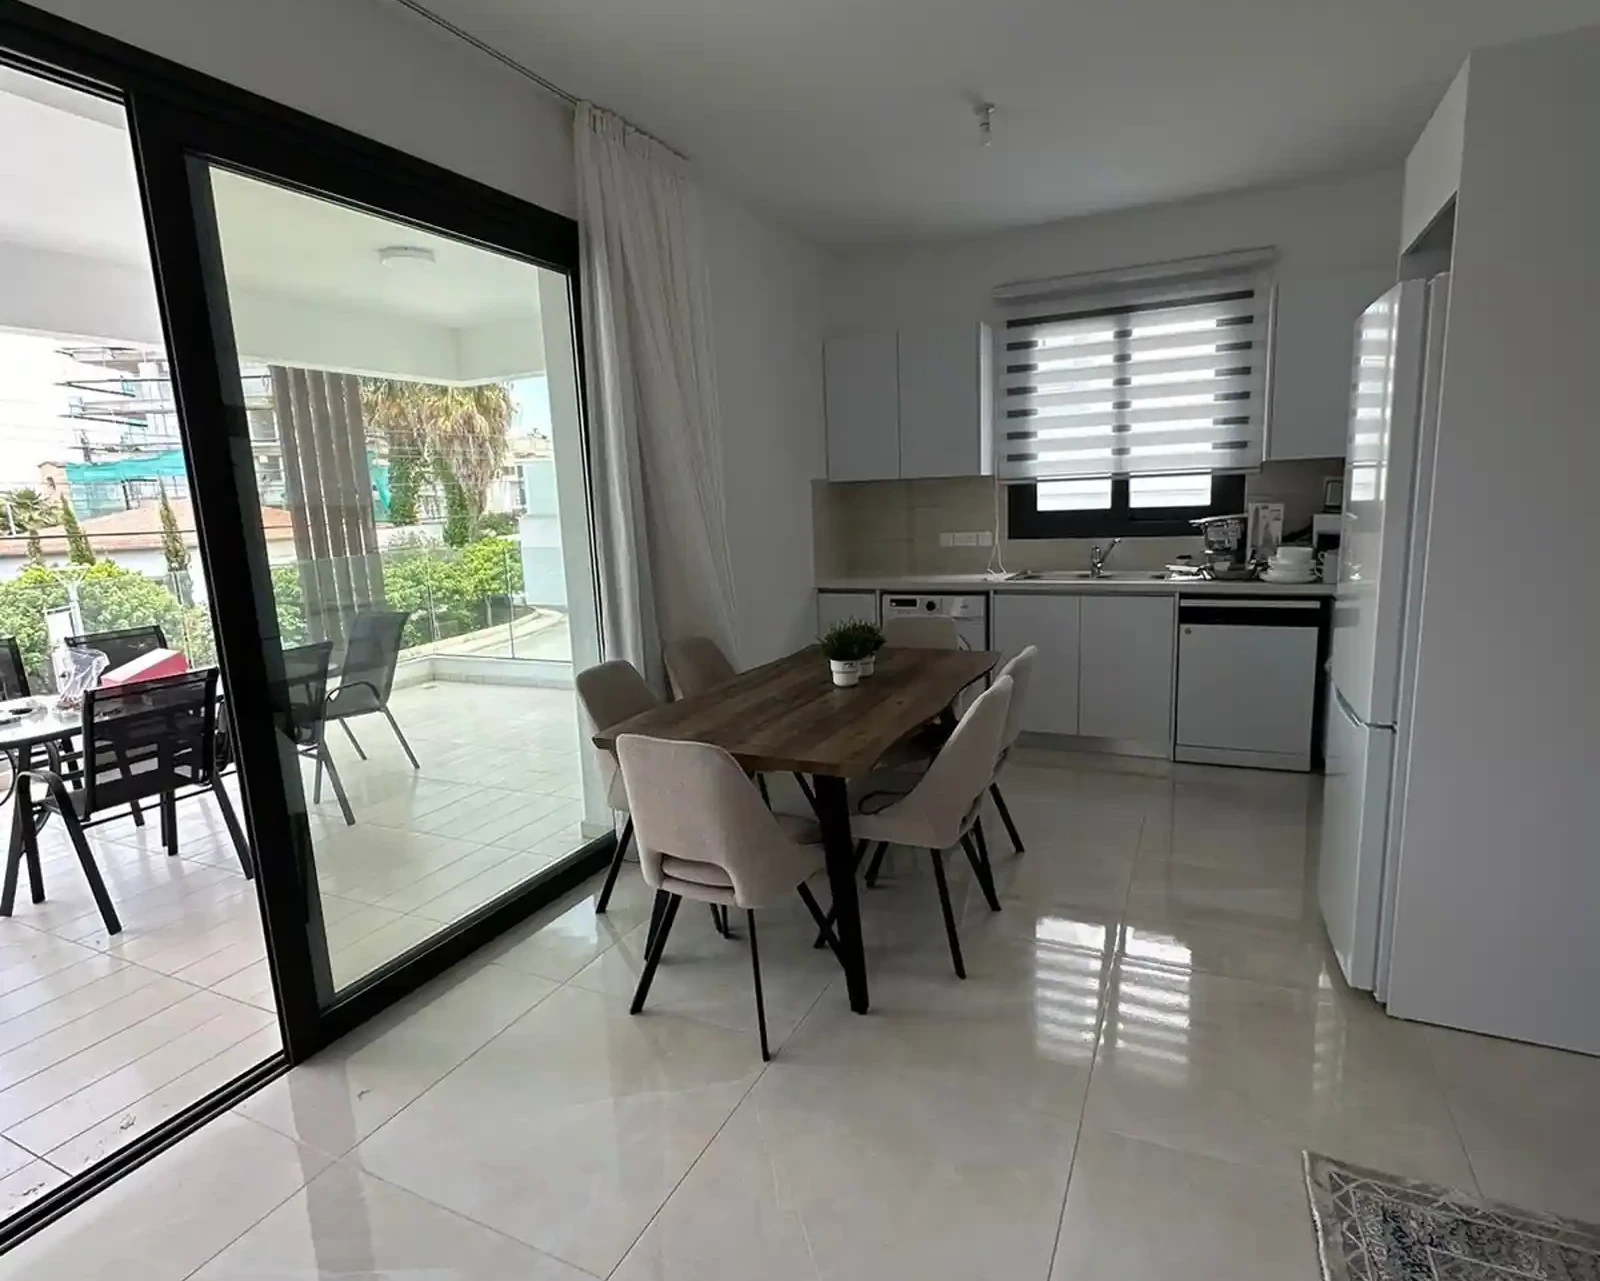 2-bedroom apartment to rent €1.600, image 1